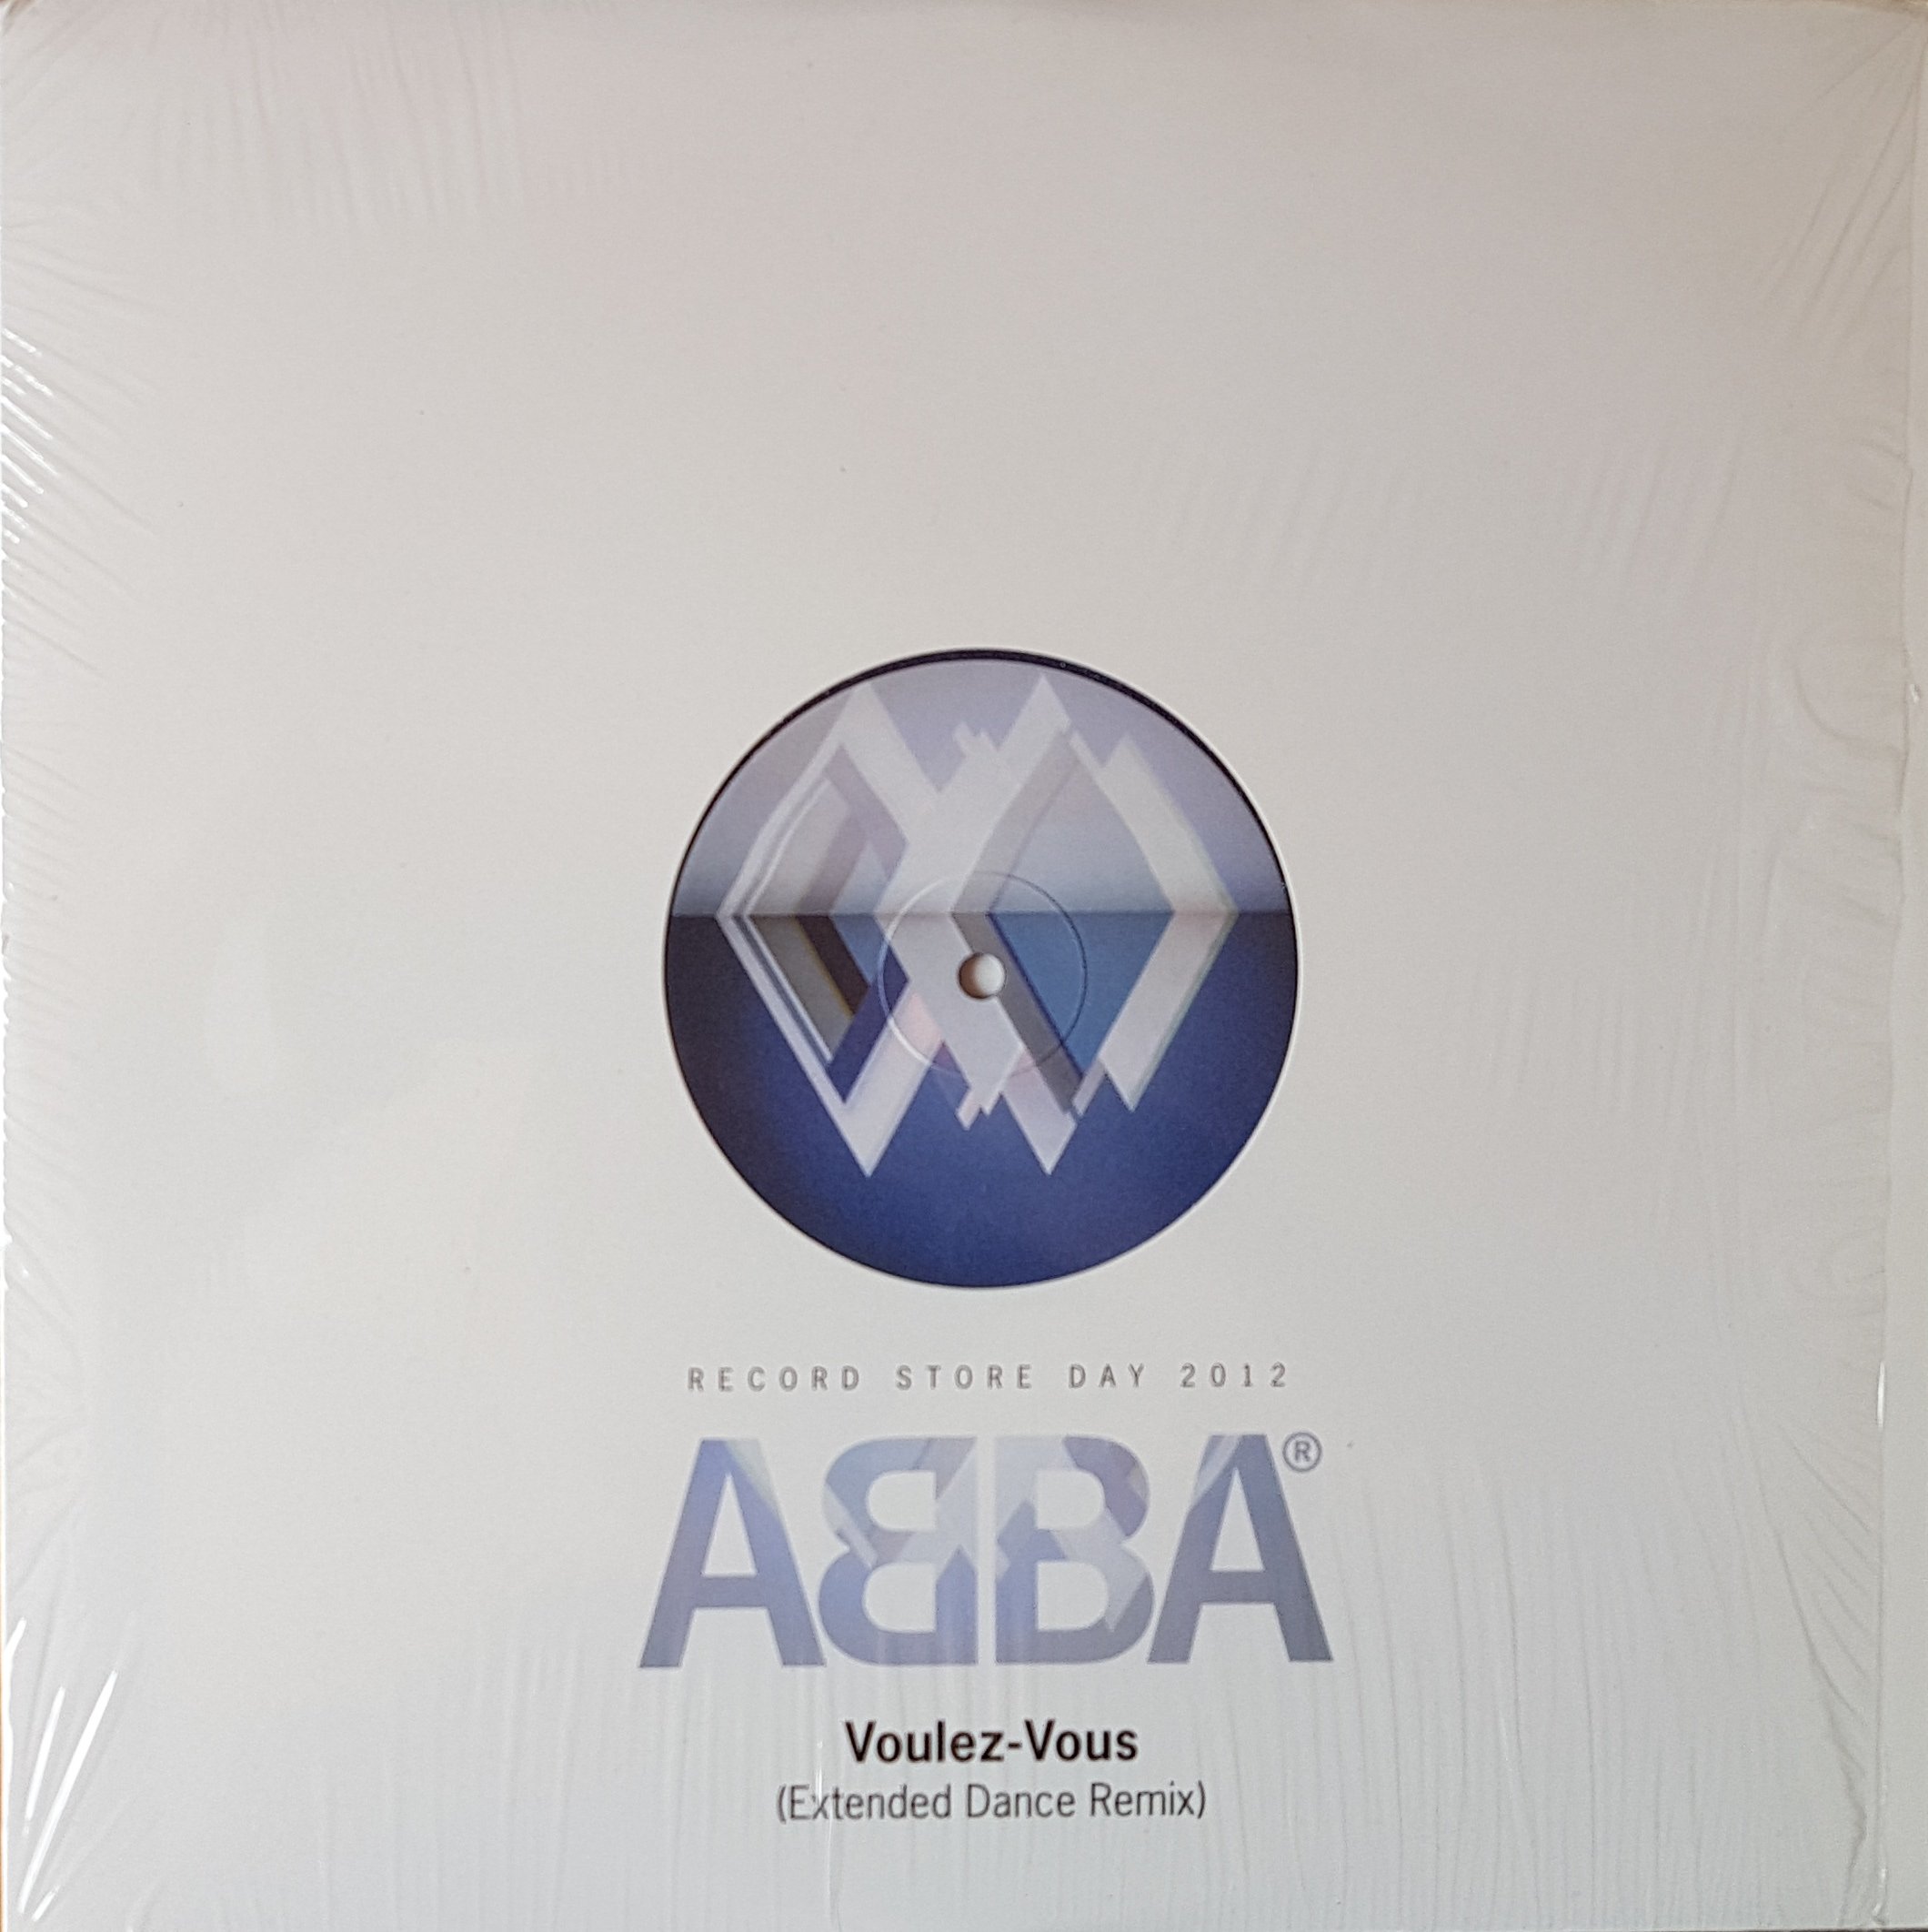 Picture of Voulez-vous (Extended dance remix) - Record Store Day 2012 by artist B. Andersson / B. Ulvaeus / ABBA 